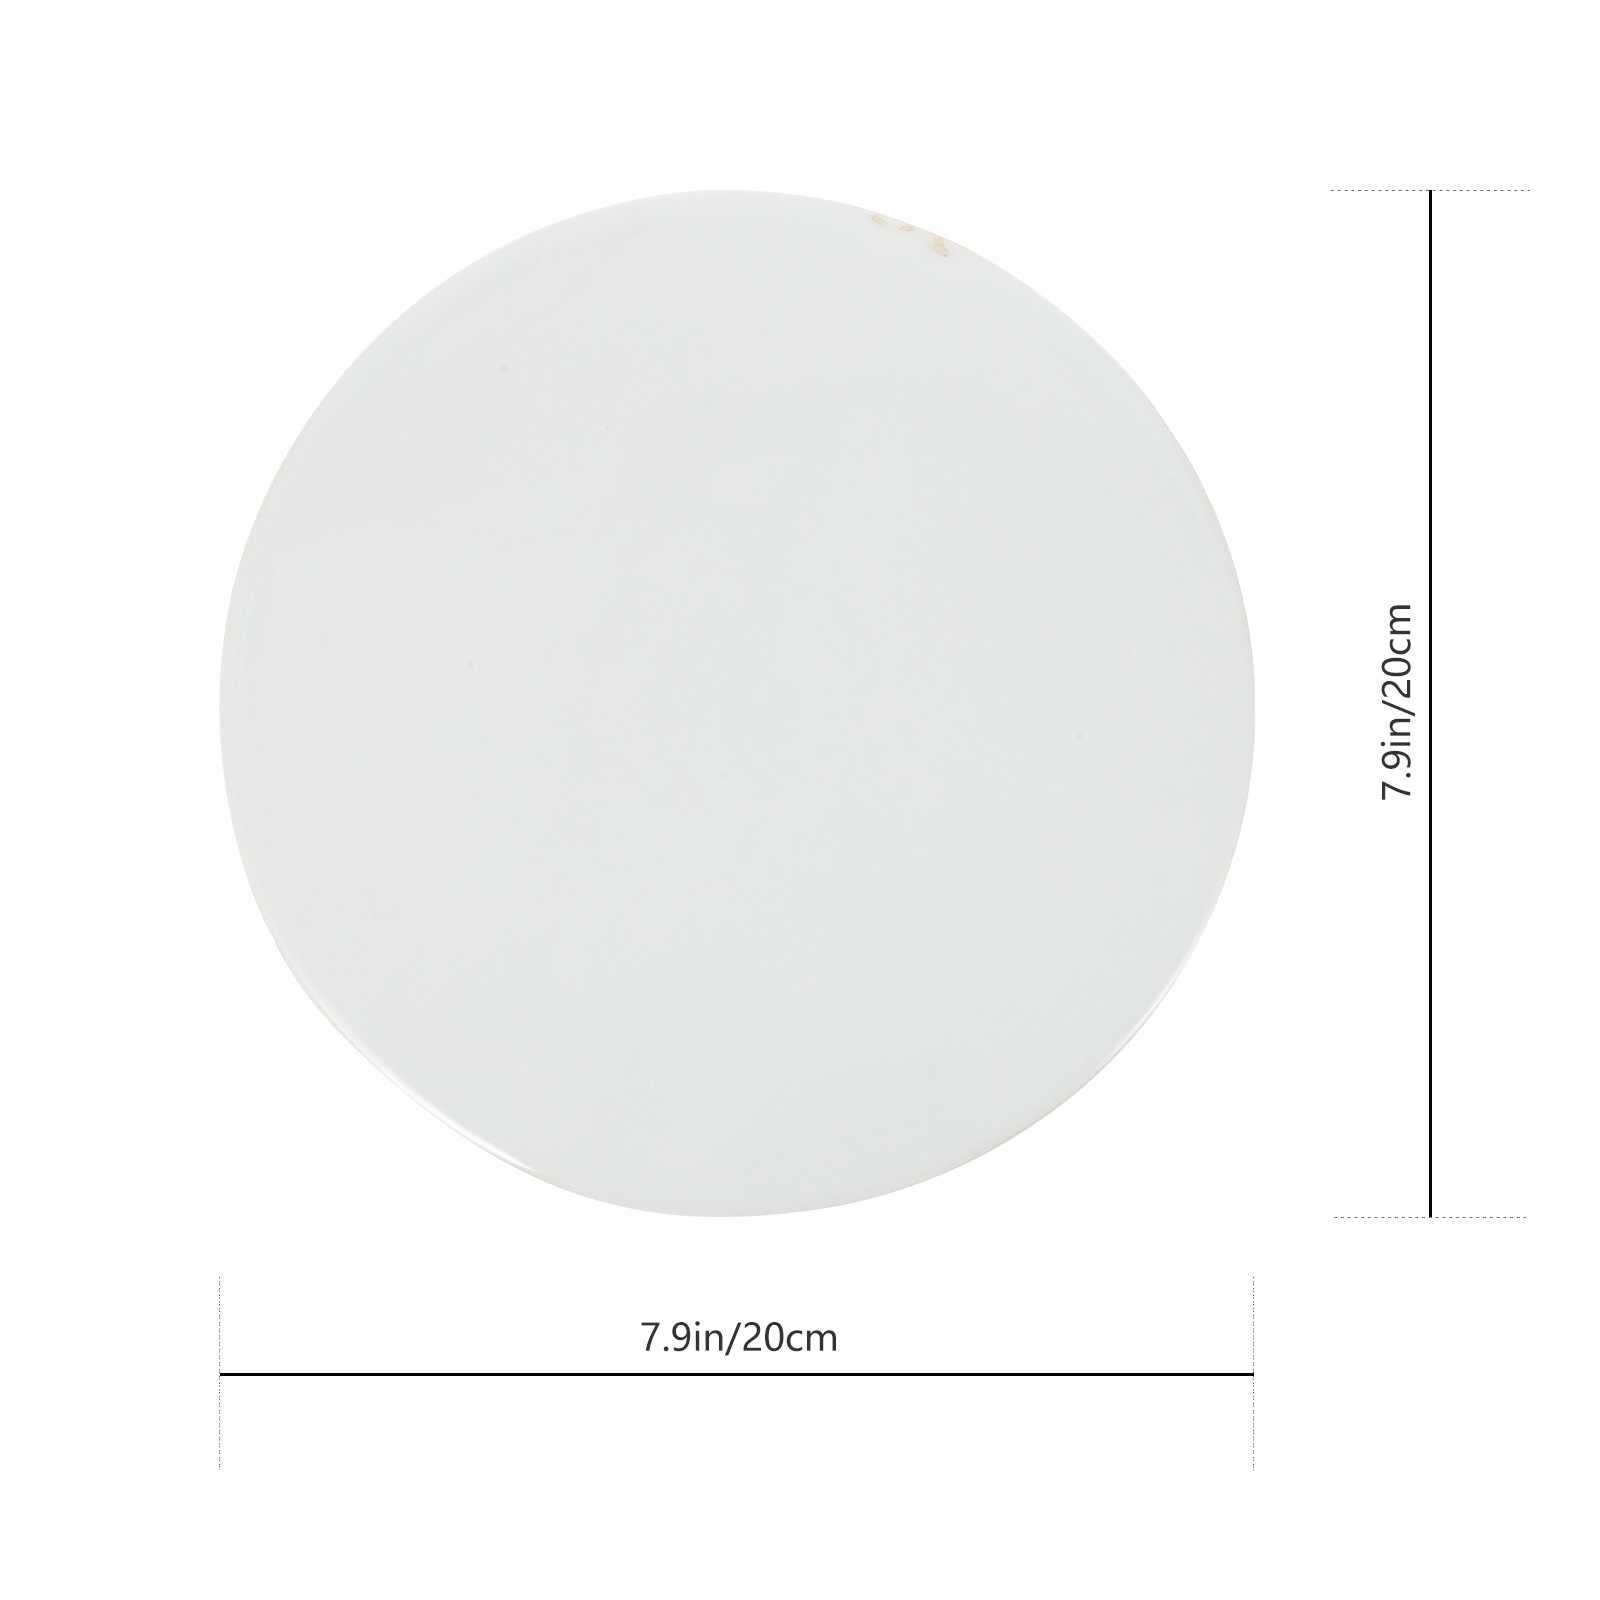 Ceramic Round Tiles Unfinished Plate Coasters Painting Porcelain Plates Blanks Dinner Blank Watercolor - image 2 of 8